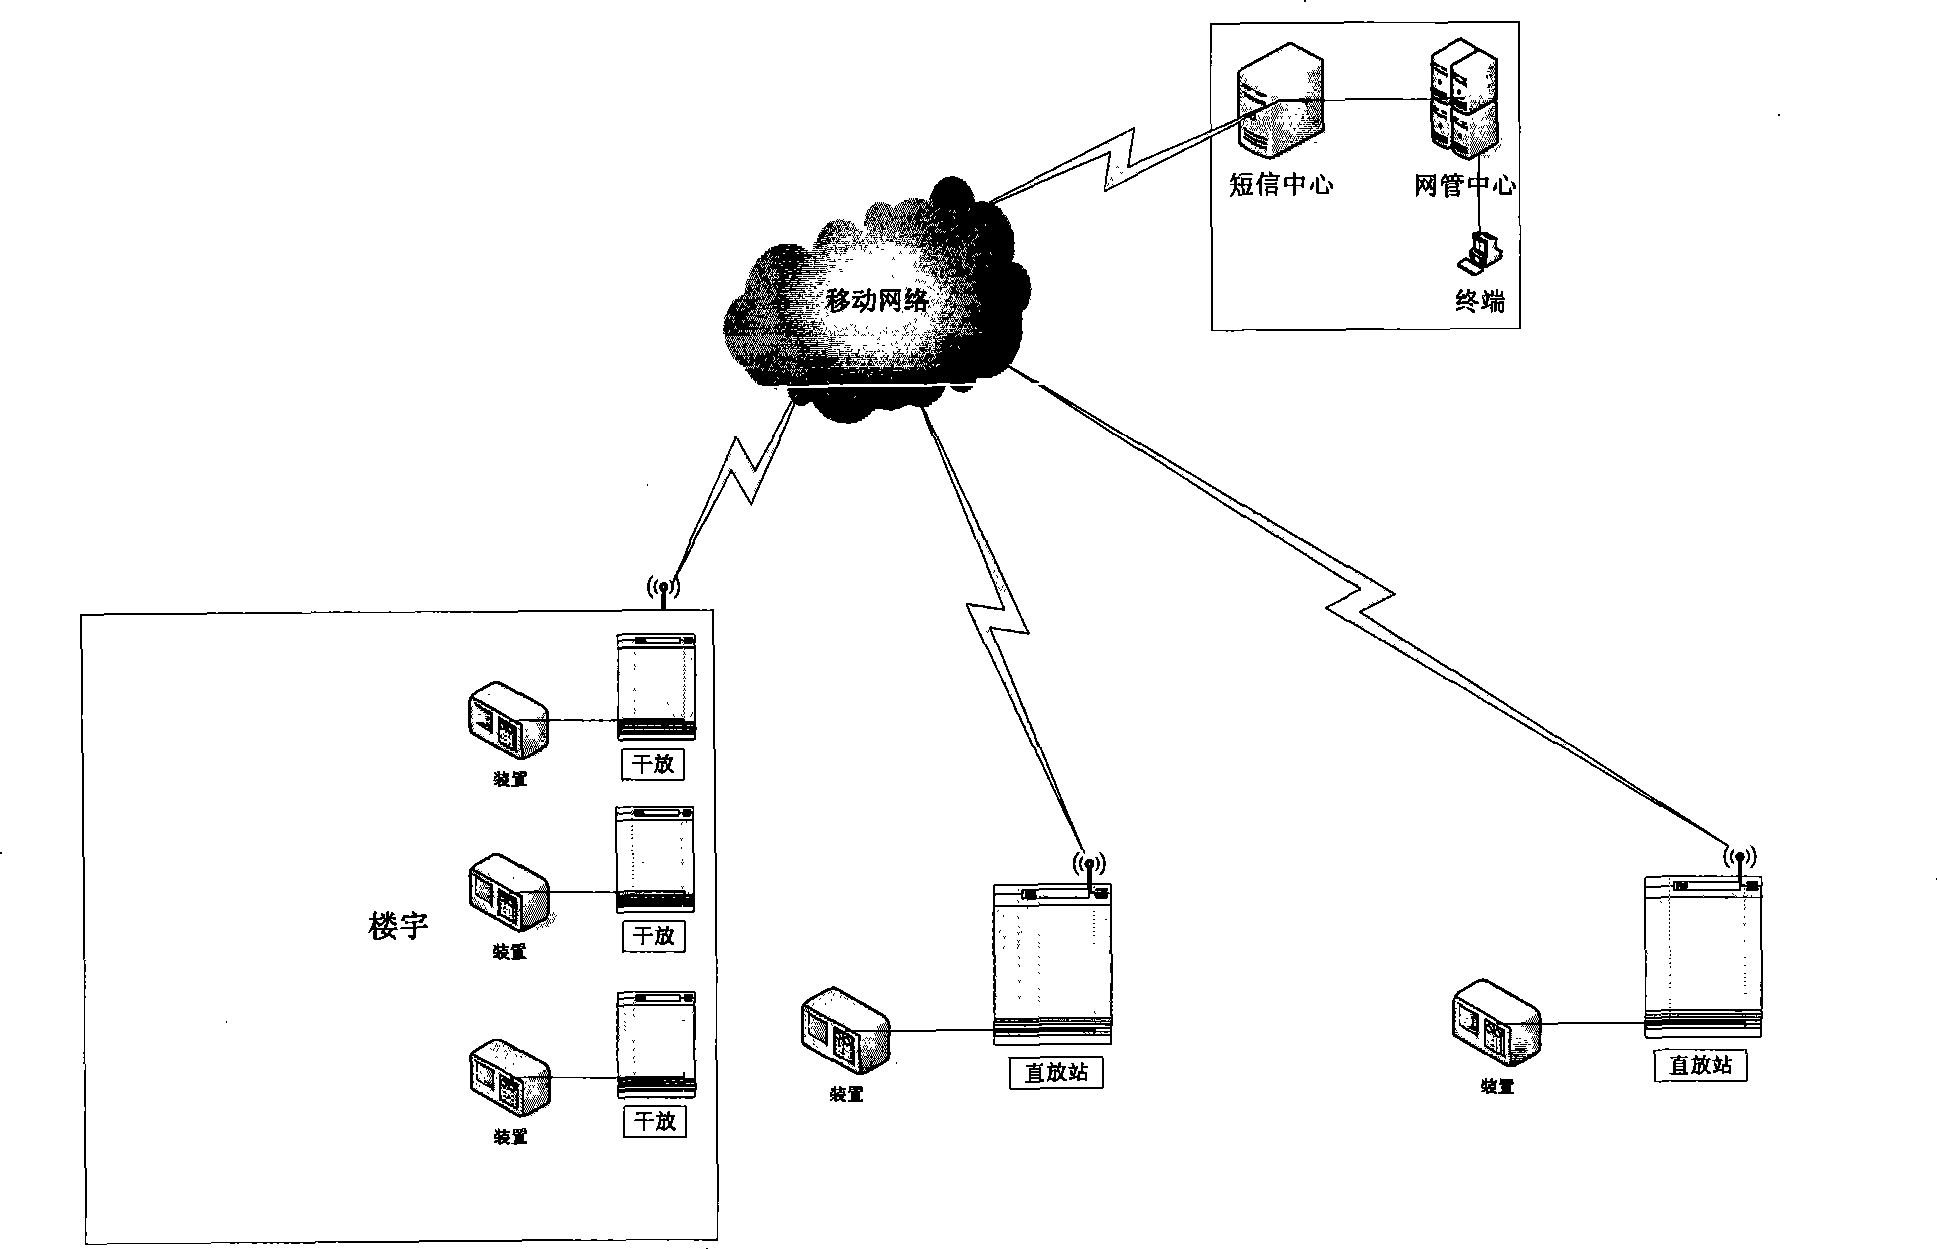 Shrouding extension system and apparatus and method for monitoring wireless network quality